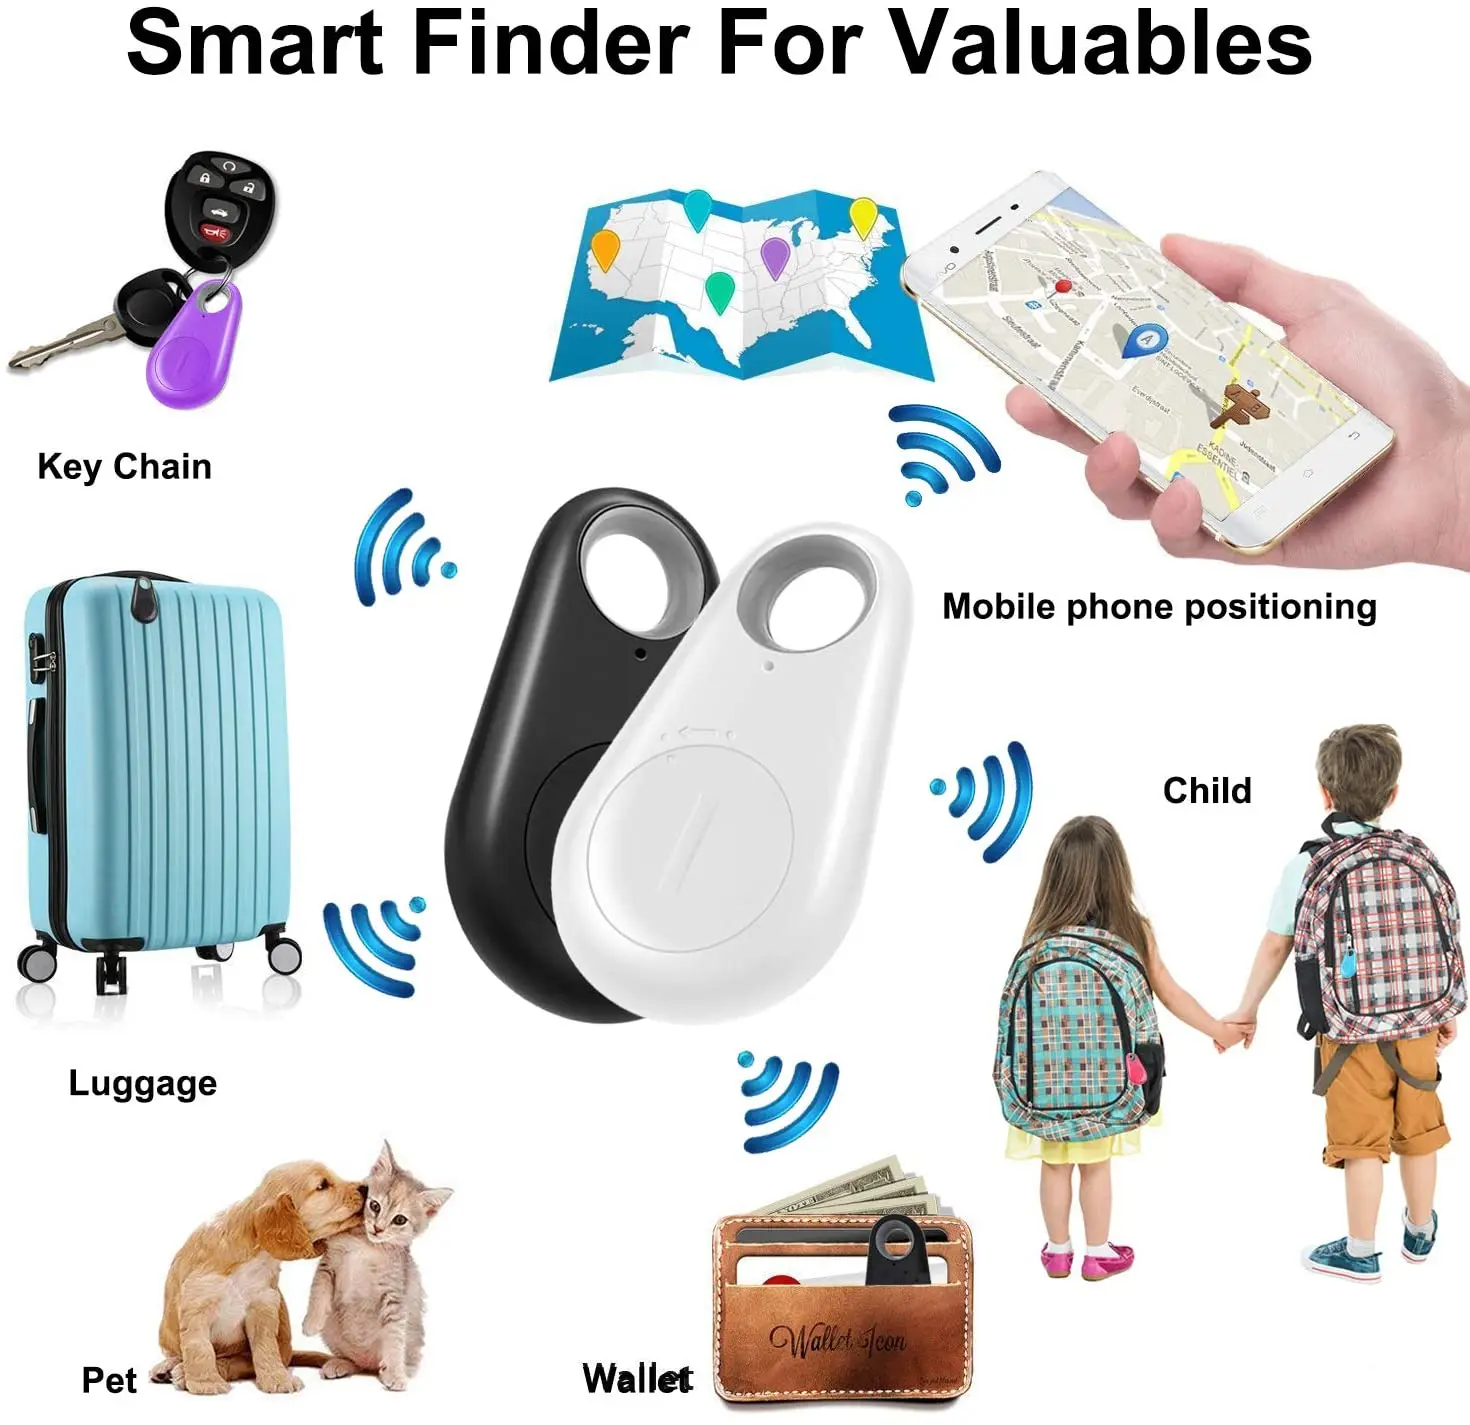 7 Pack Key Finder Smart Tracker,Wireless Anti-Lost Alarm Sensor Item Finder GPS Tracker Locator for Kids Pets Dogs Cats Car Phone Purse Luggage Small Things Selfie Shutter Tracking Device New Updated 